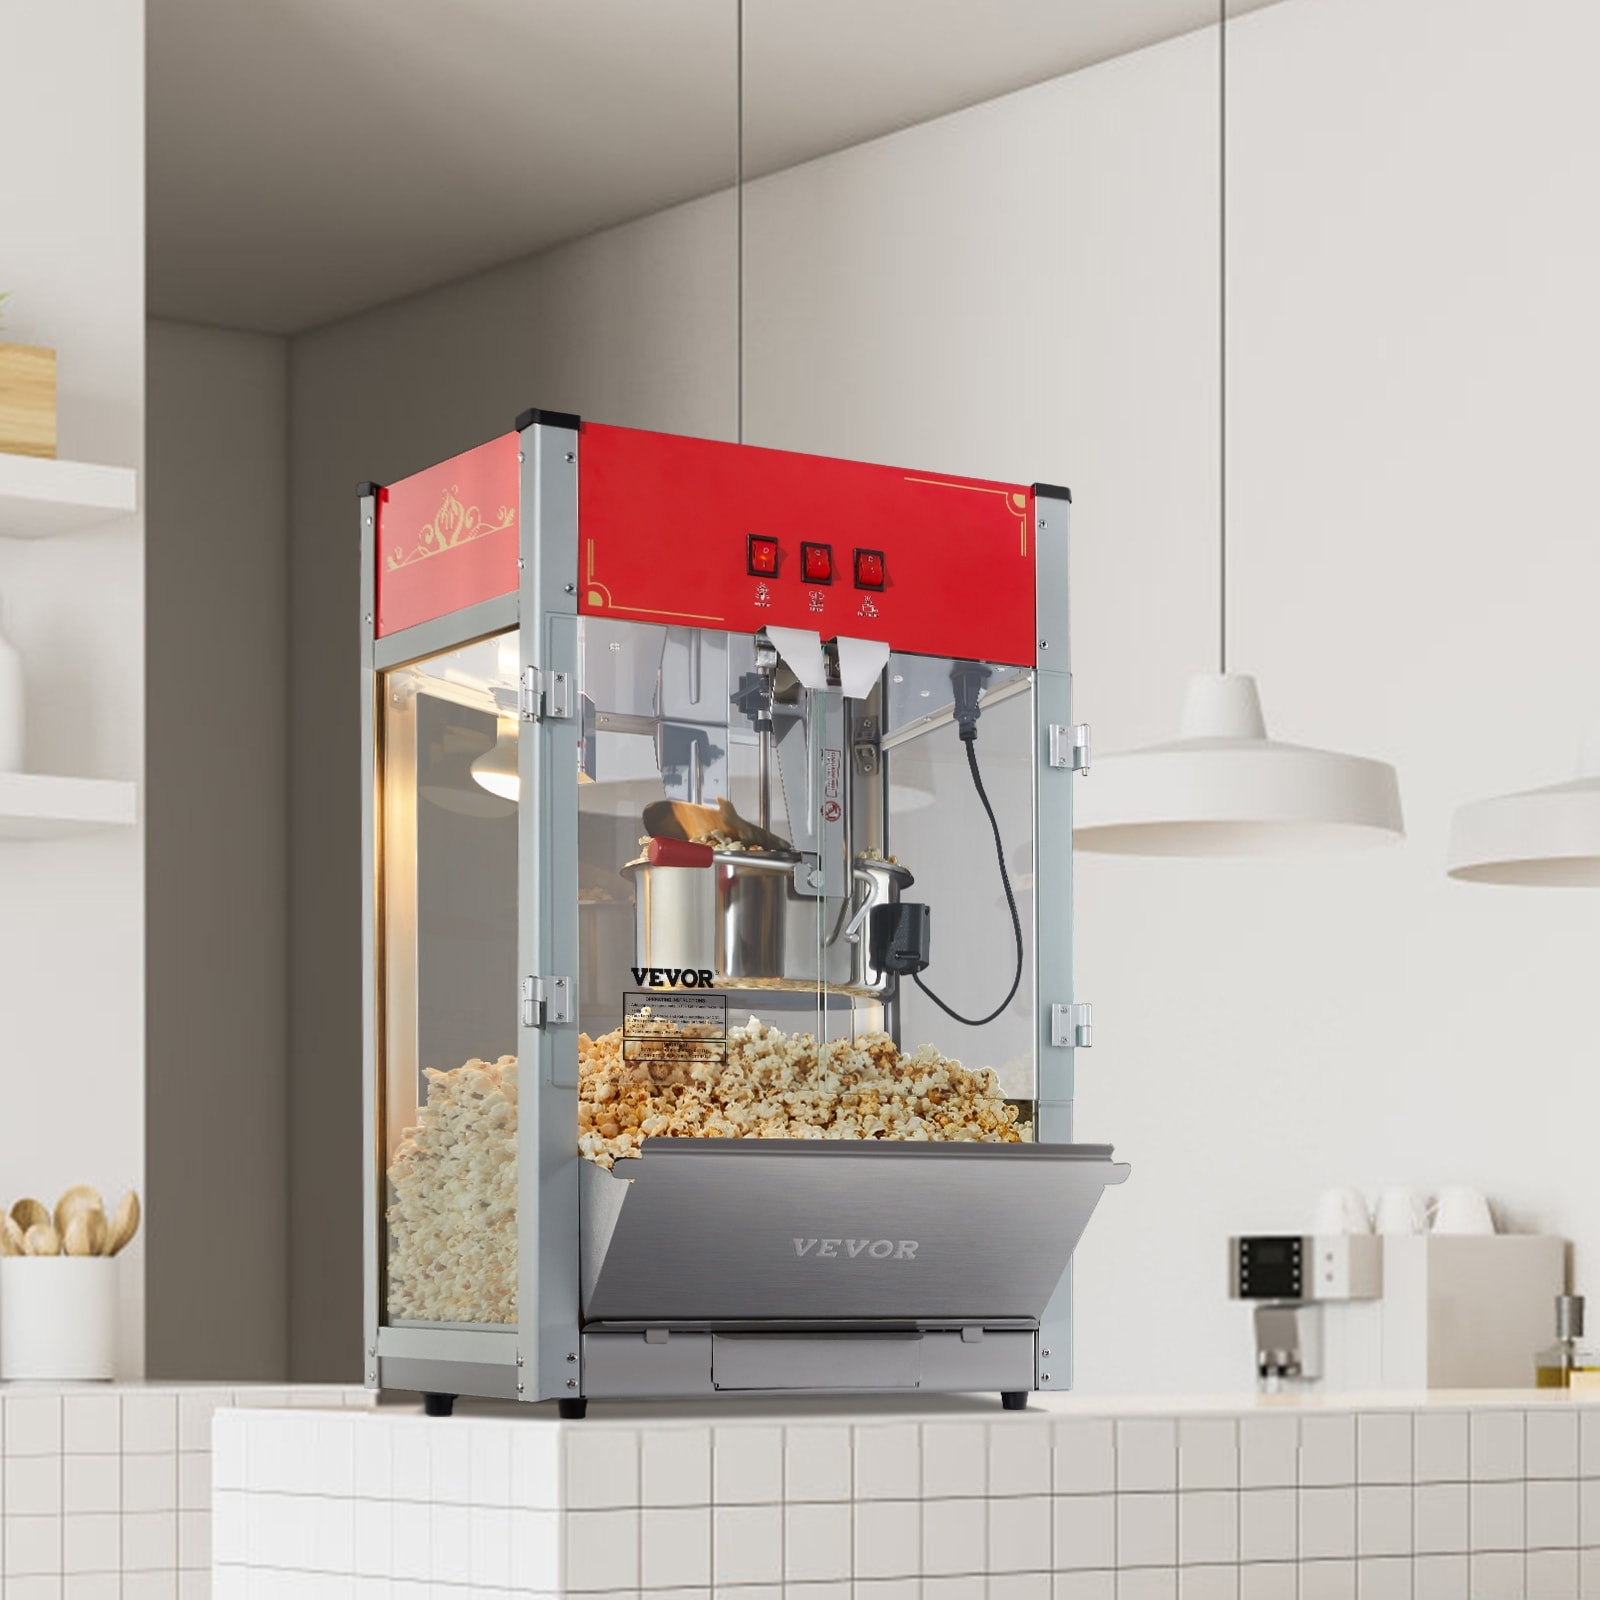 https://ak1.ostkcdn.com/images/products/is/images/direct/22171ef28ecb0826ab8ca9ab1052cb6784bfea05/VEVOR-Popcorn-Popper-Machine-Countertop-Popcorn-Maker-Red.jpg